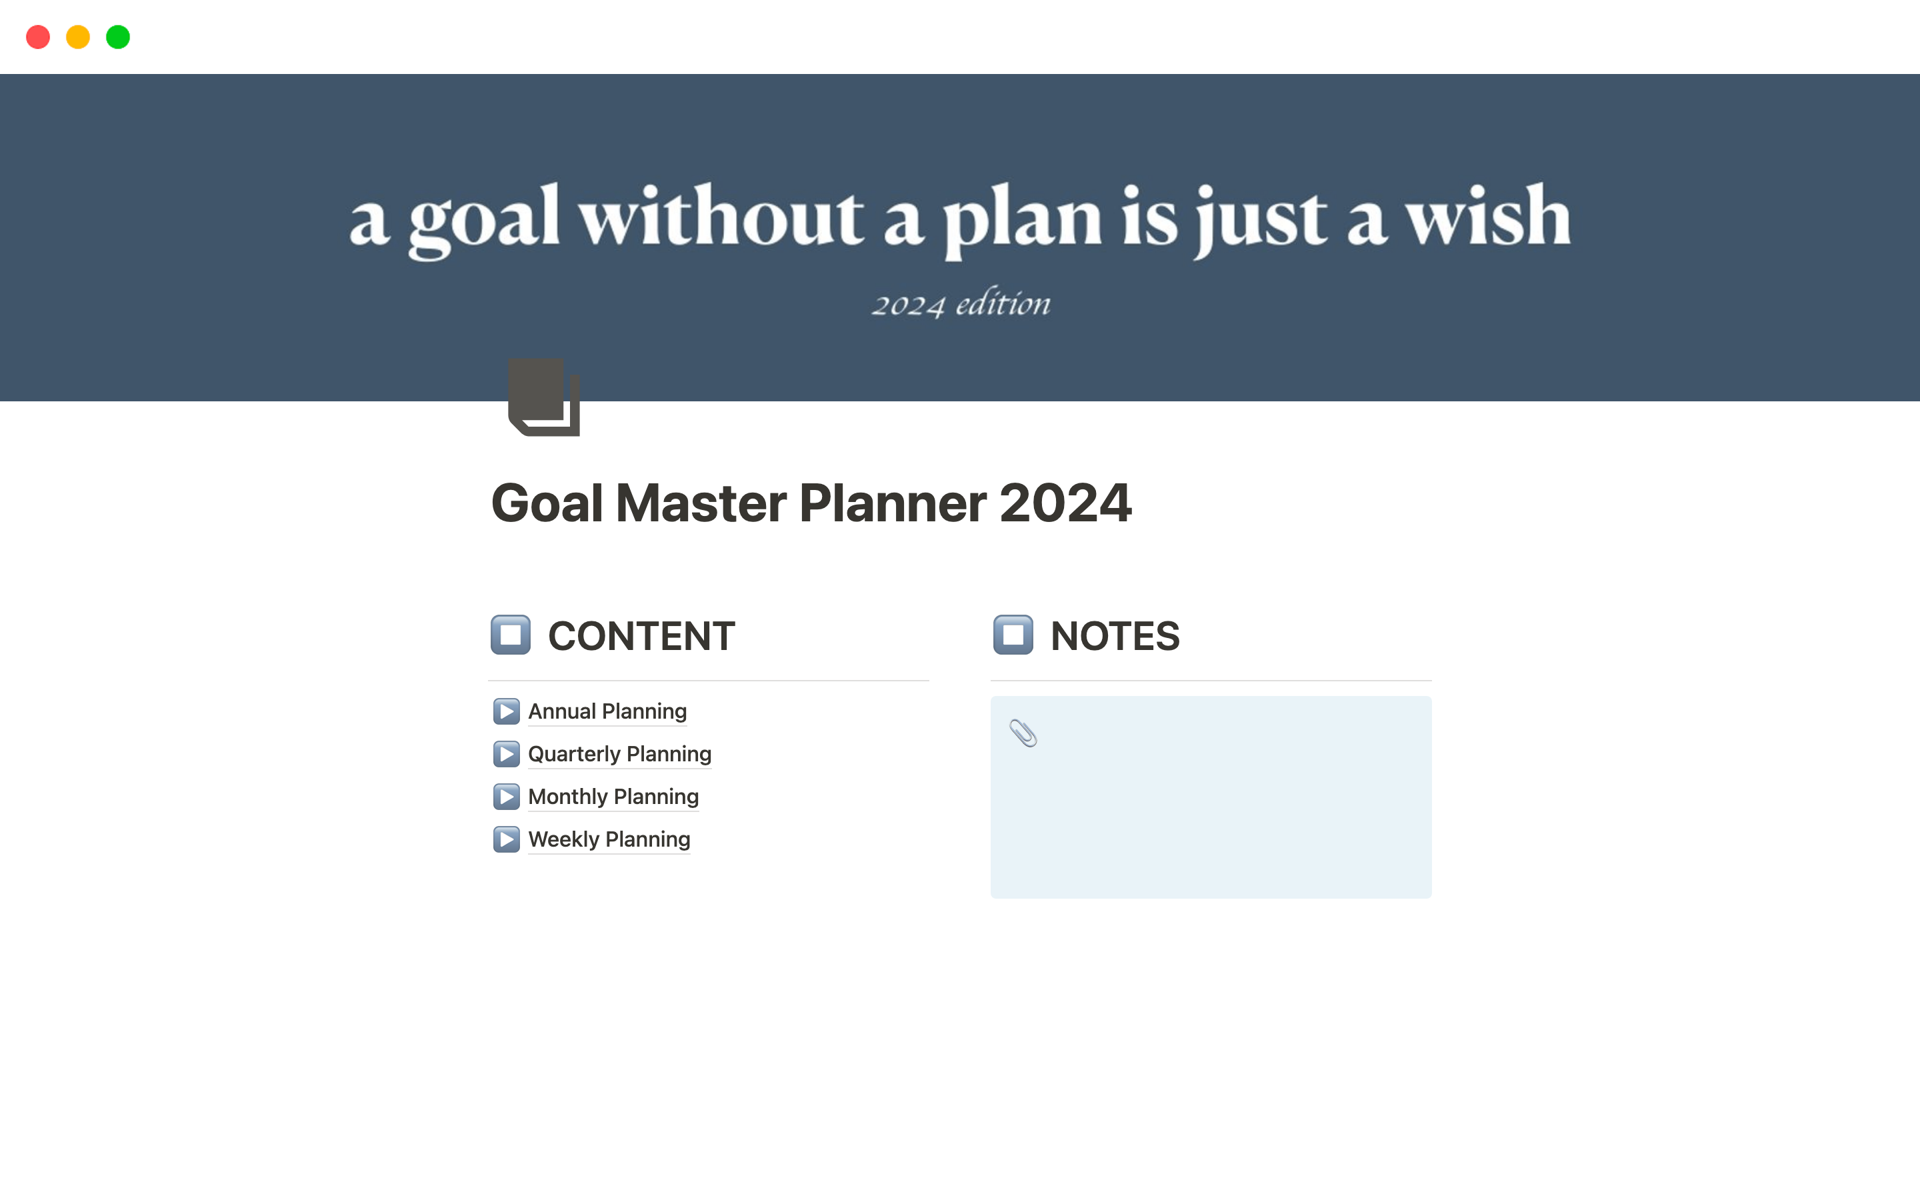 The ultimate planner is designed to guide you through a year of focused goal achievement by encompassing annual, quarterly, monthly, and weekly planning, ensuring that no goal is left uncharted.